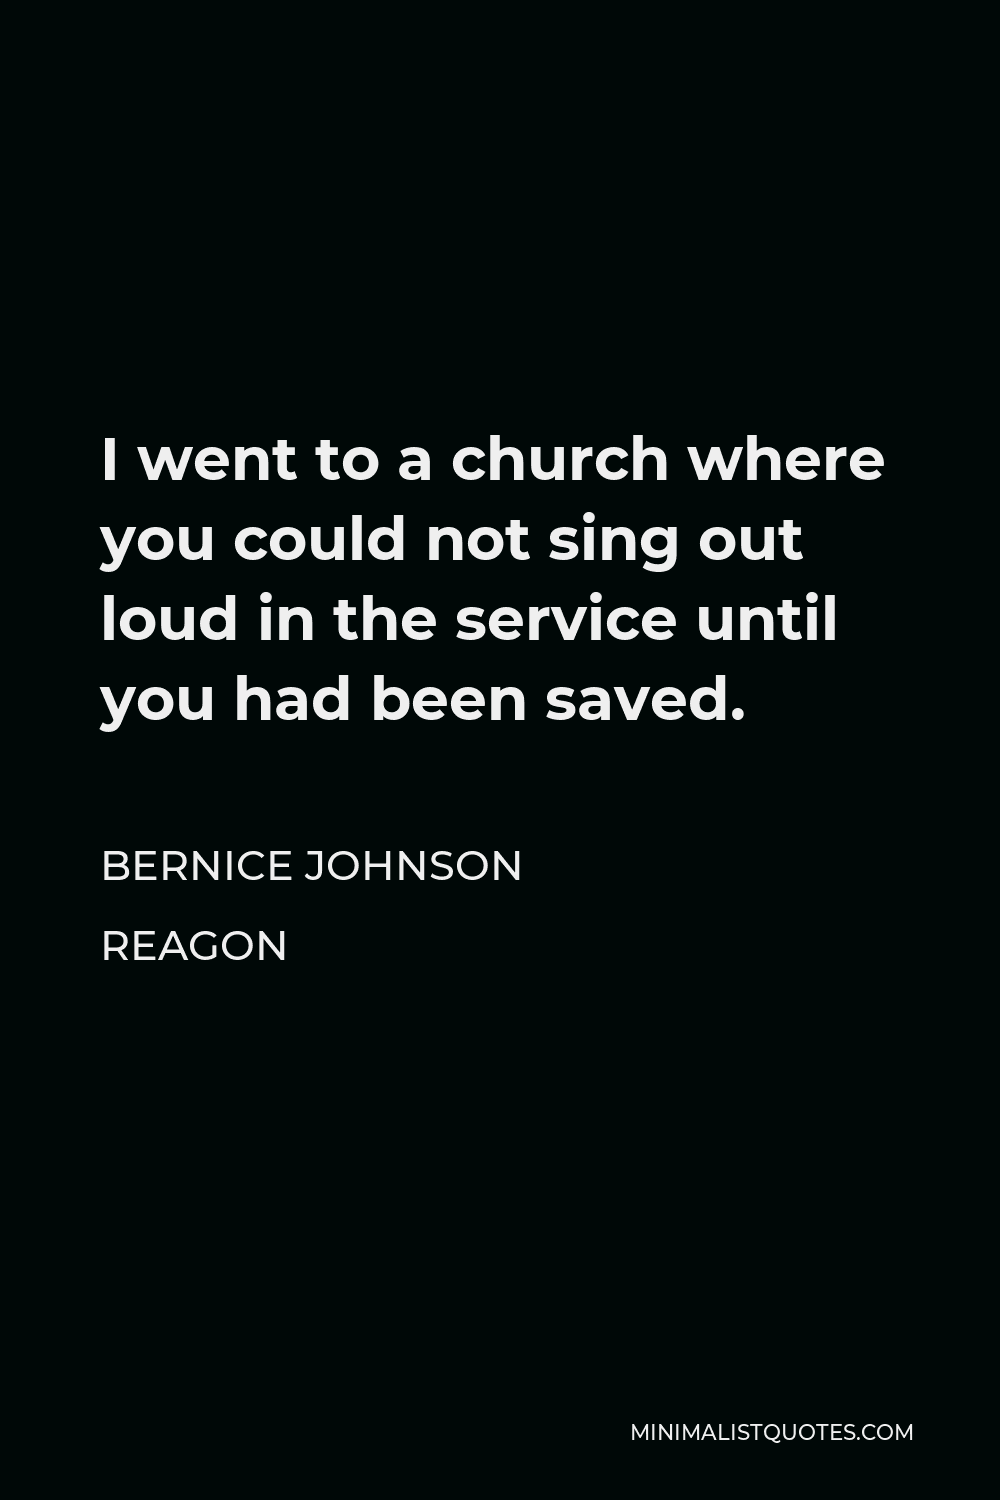 Bernice Johnson Reagon Quote - I went to a church where you could not sing out loud in the service until you had been saved.